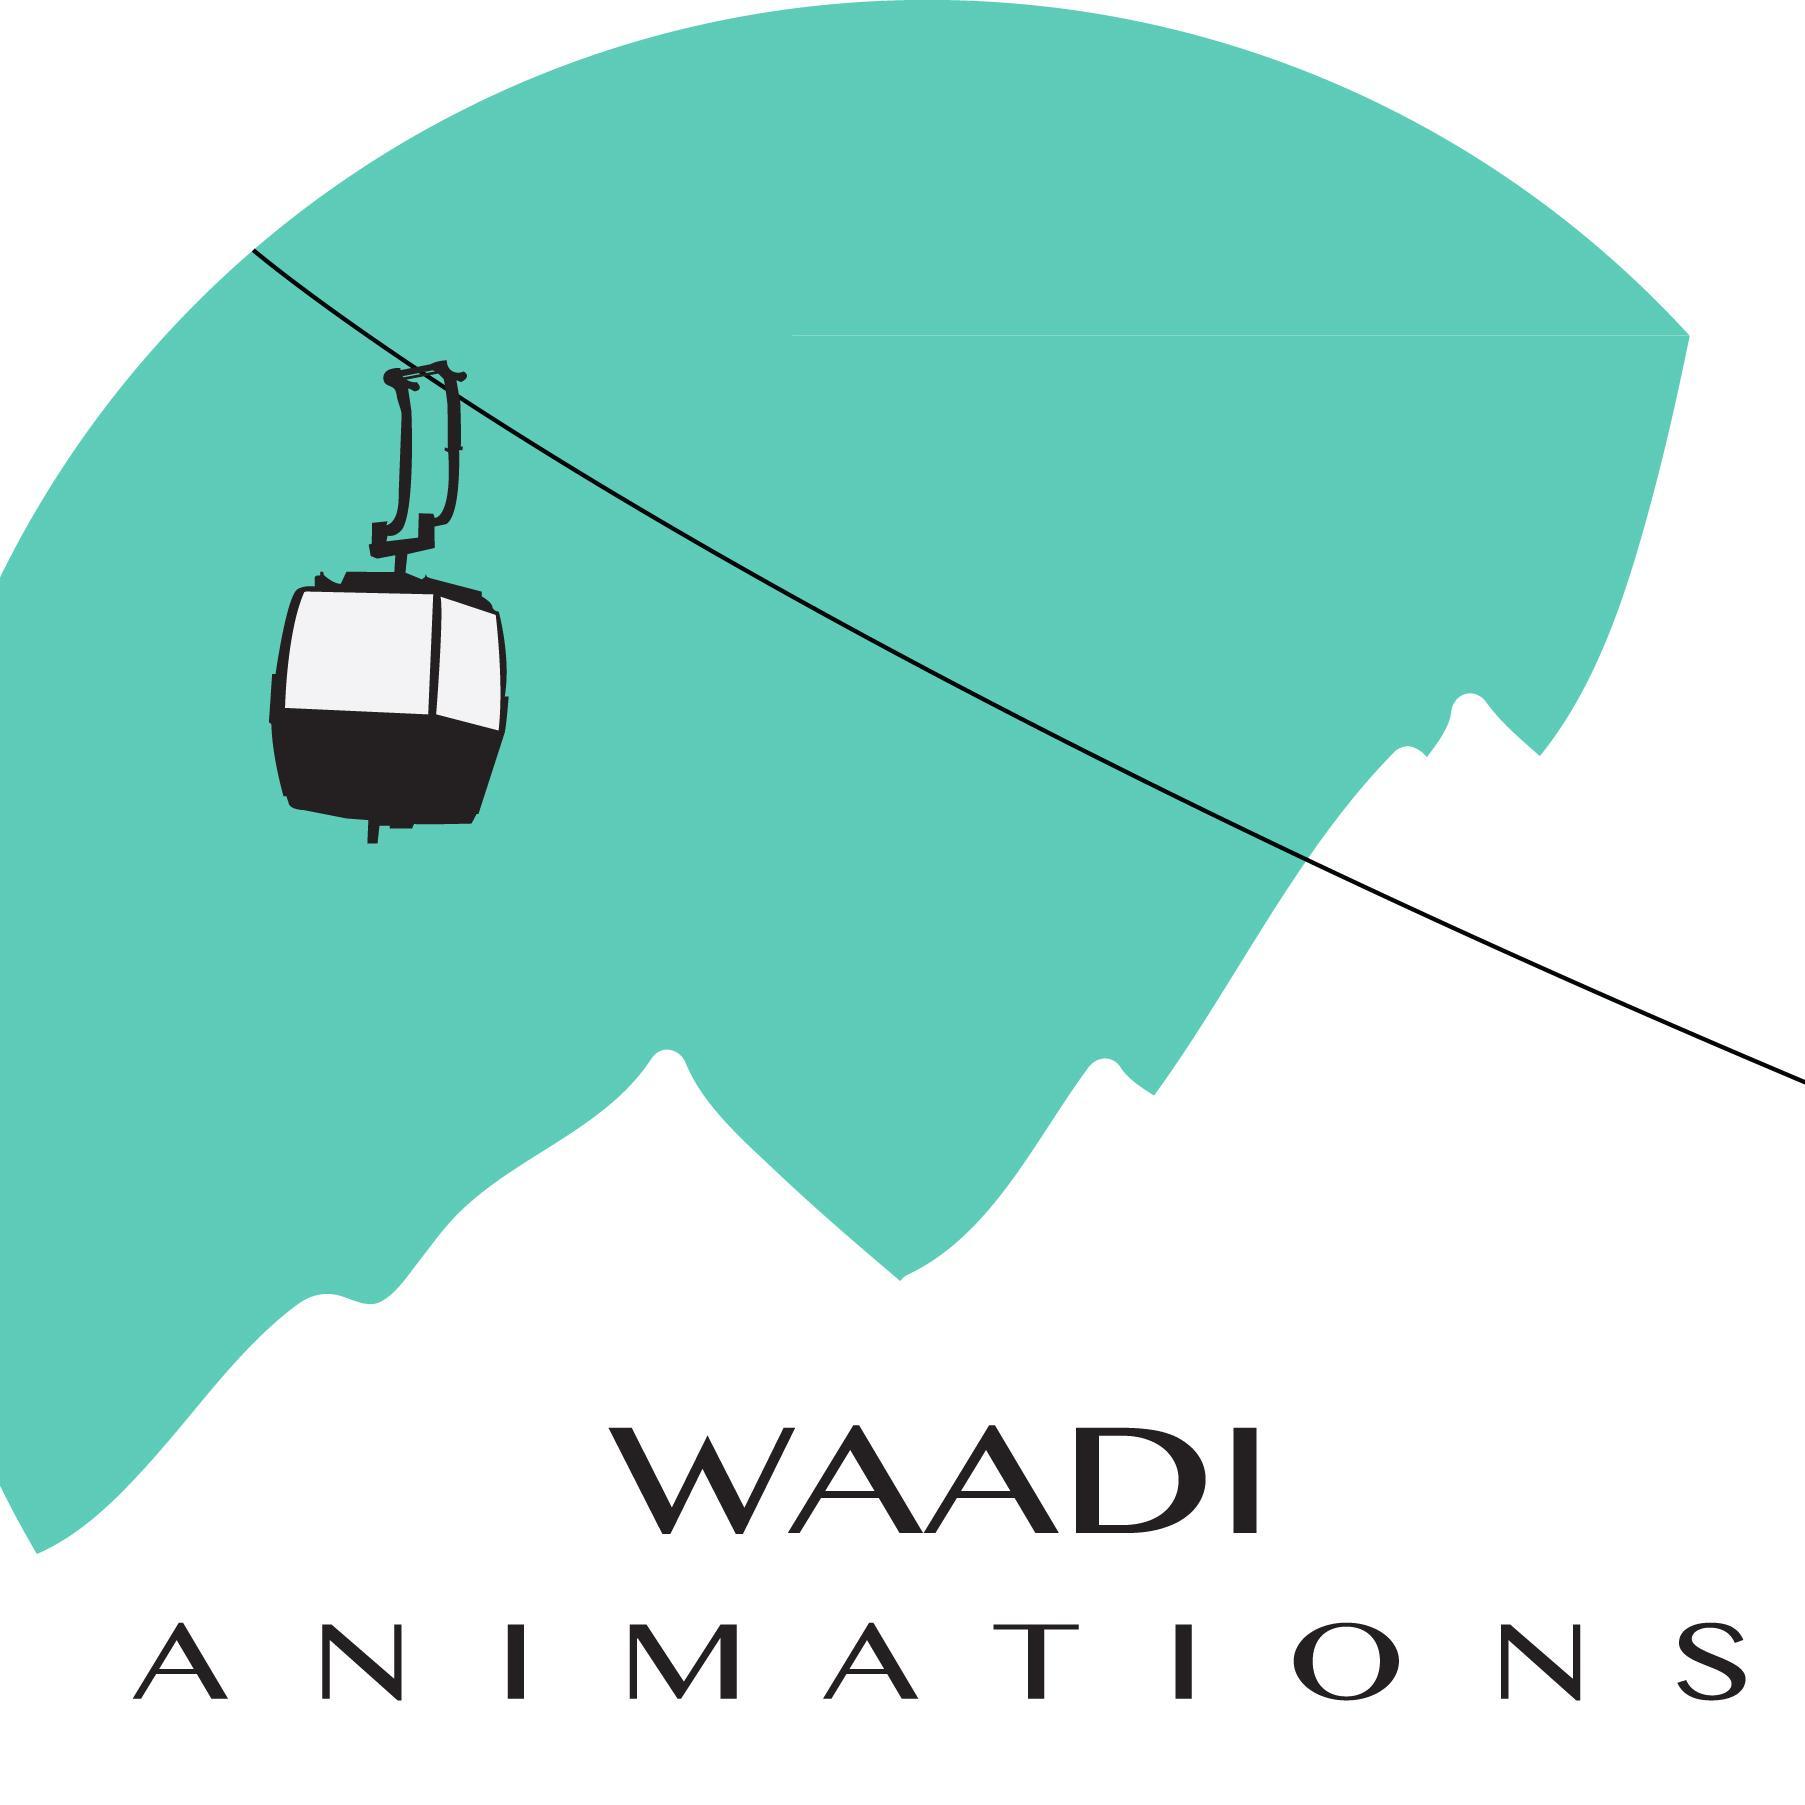 Waadi Animations is the creator of Pakistans Favourite Movie, 3Bahadur.
A joint venture of ARY Films & SOC Films; it is dedicated to producing Animated Content.